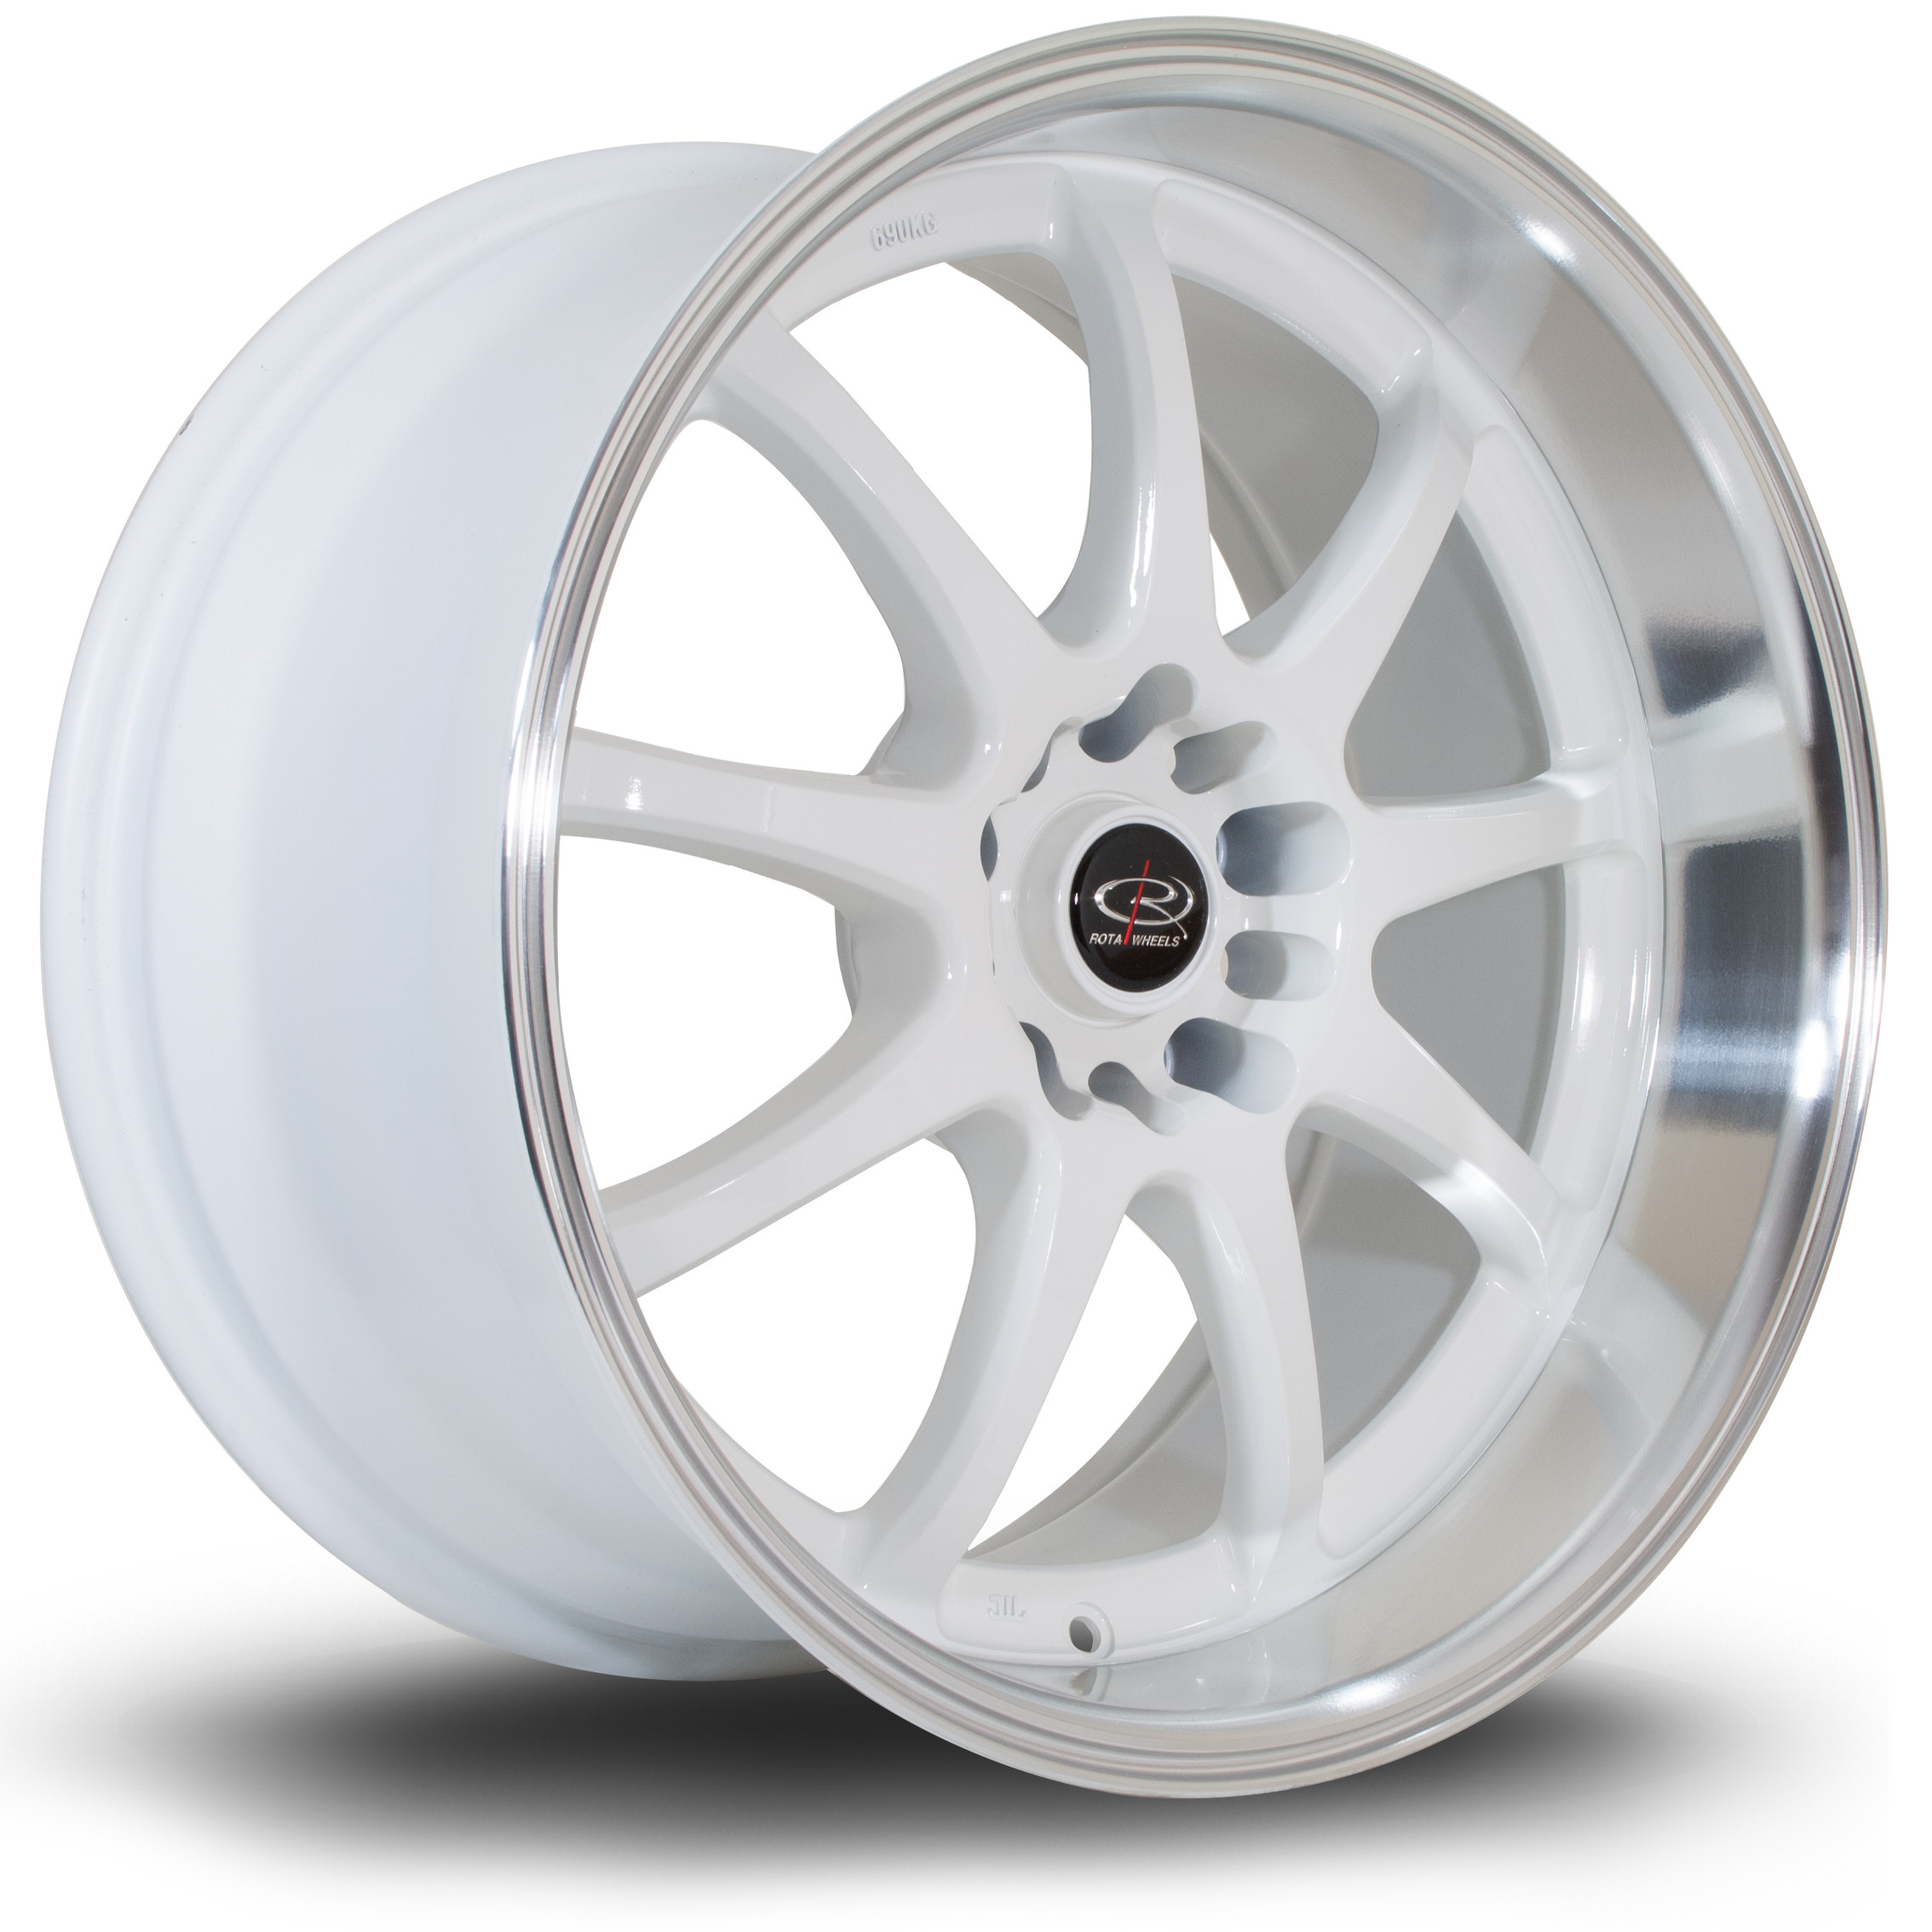 P1R 18x10 5x114 ET18 White with Polished Lip